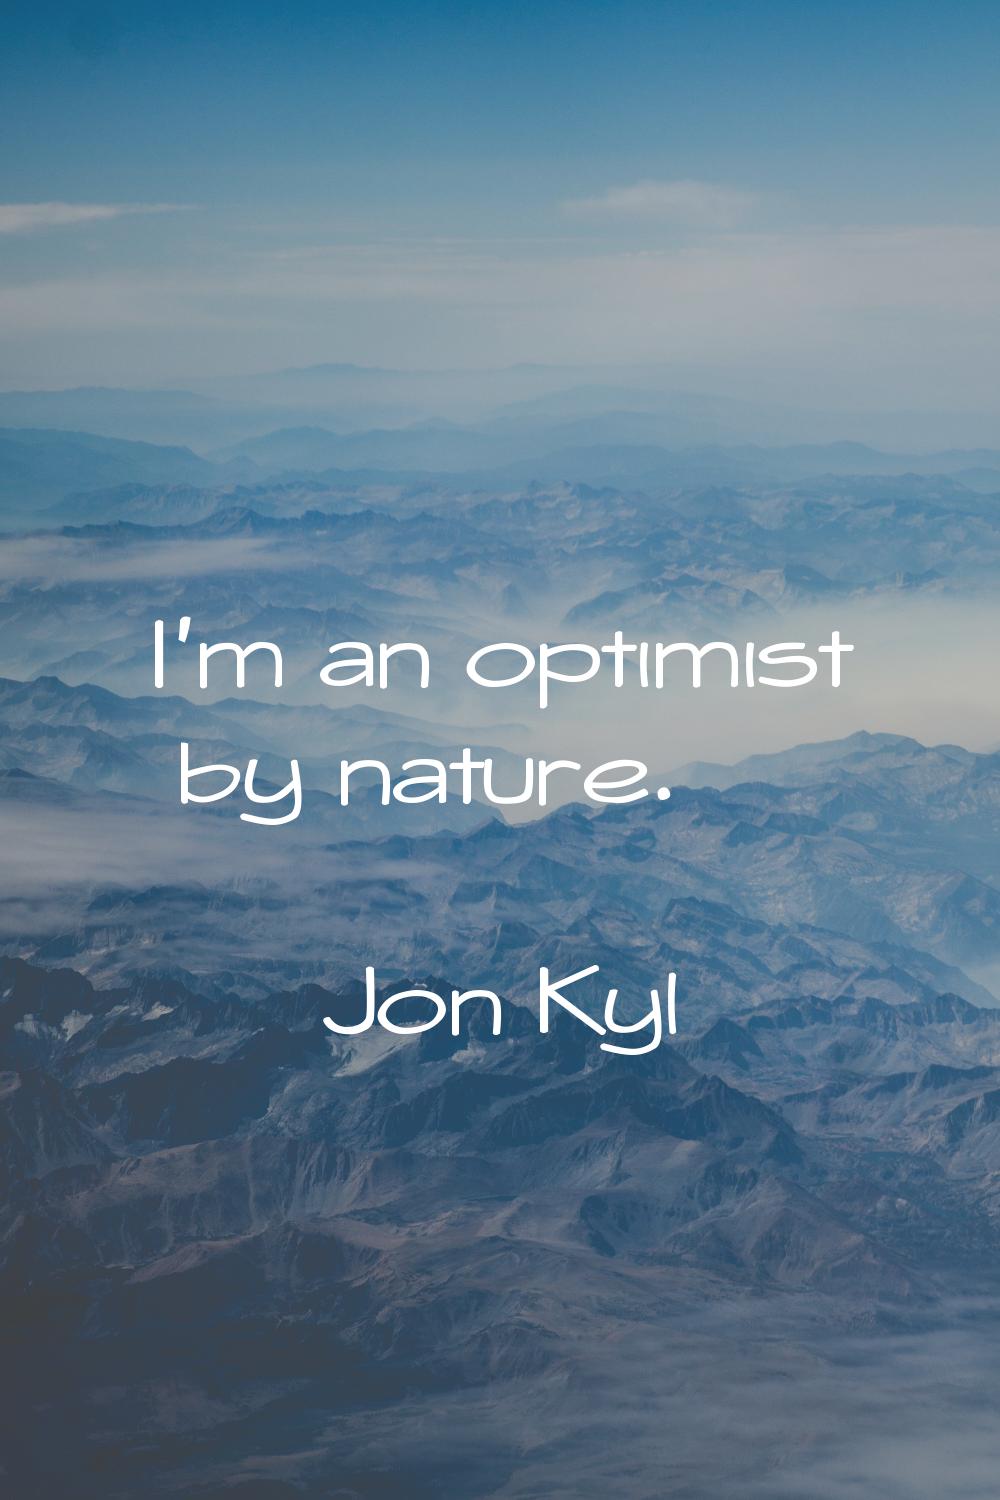 I'm an optimist by nature.